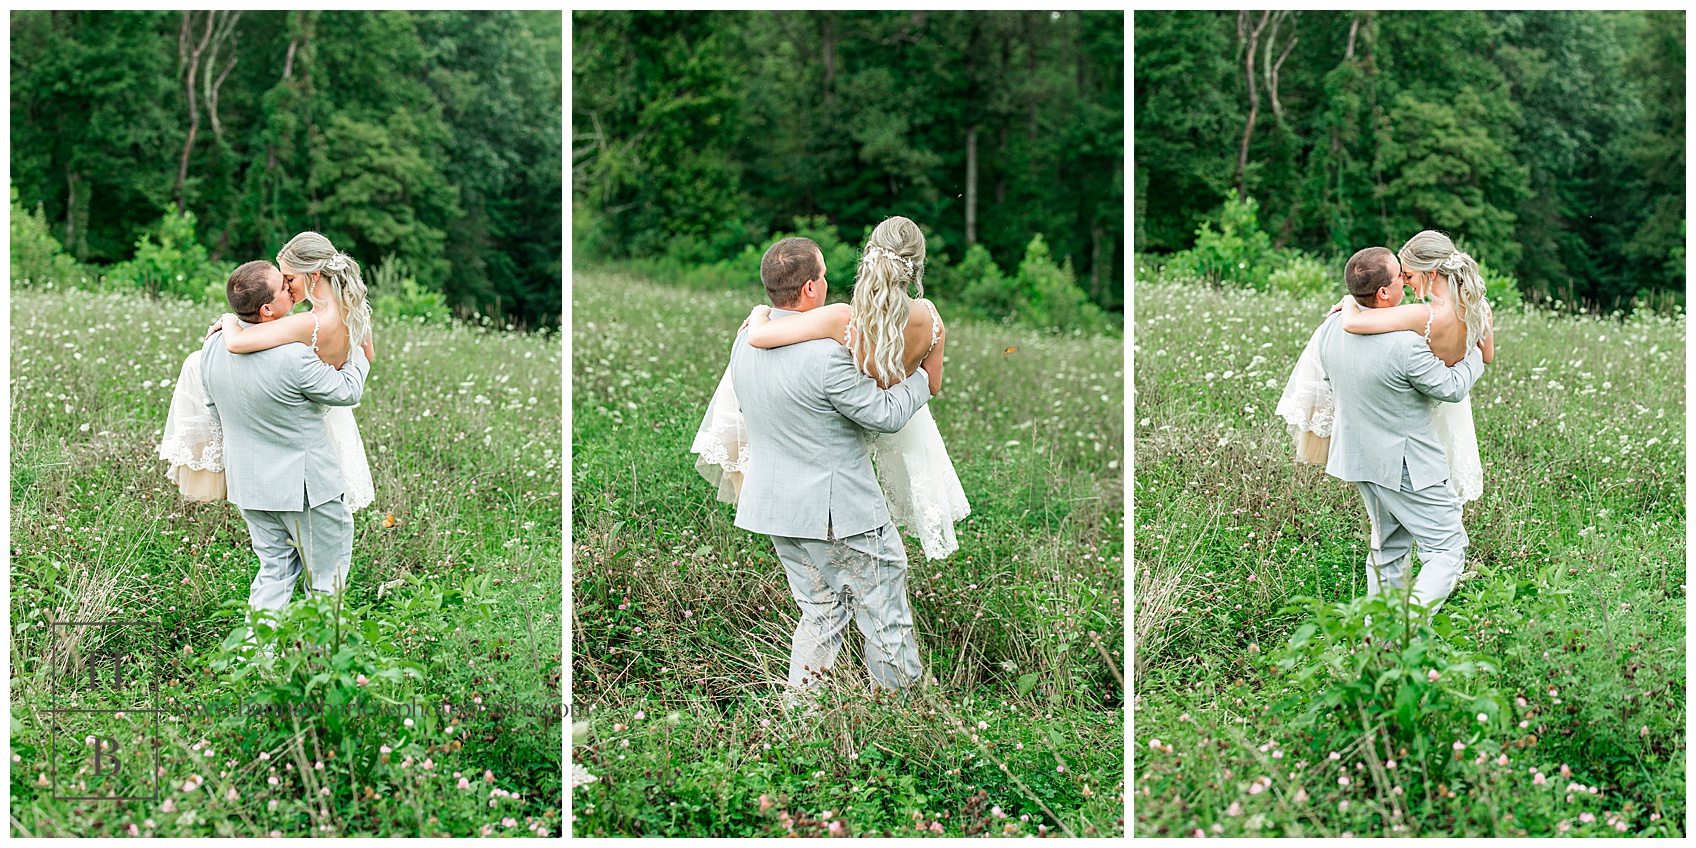 Groom Carrying Bride Through Field at The Barn on Enchanted Acres